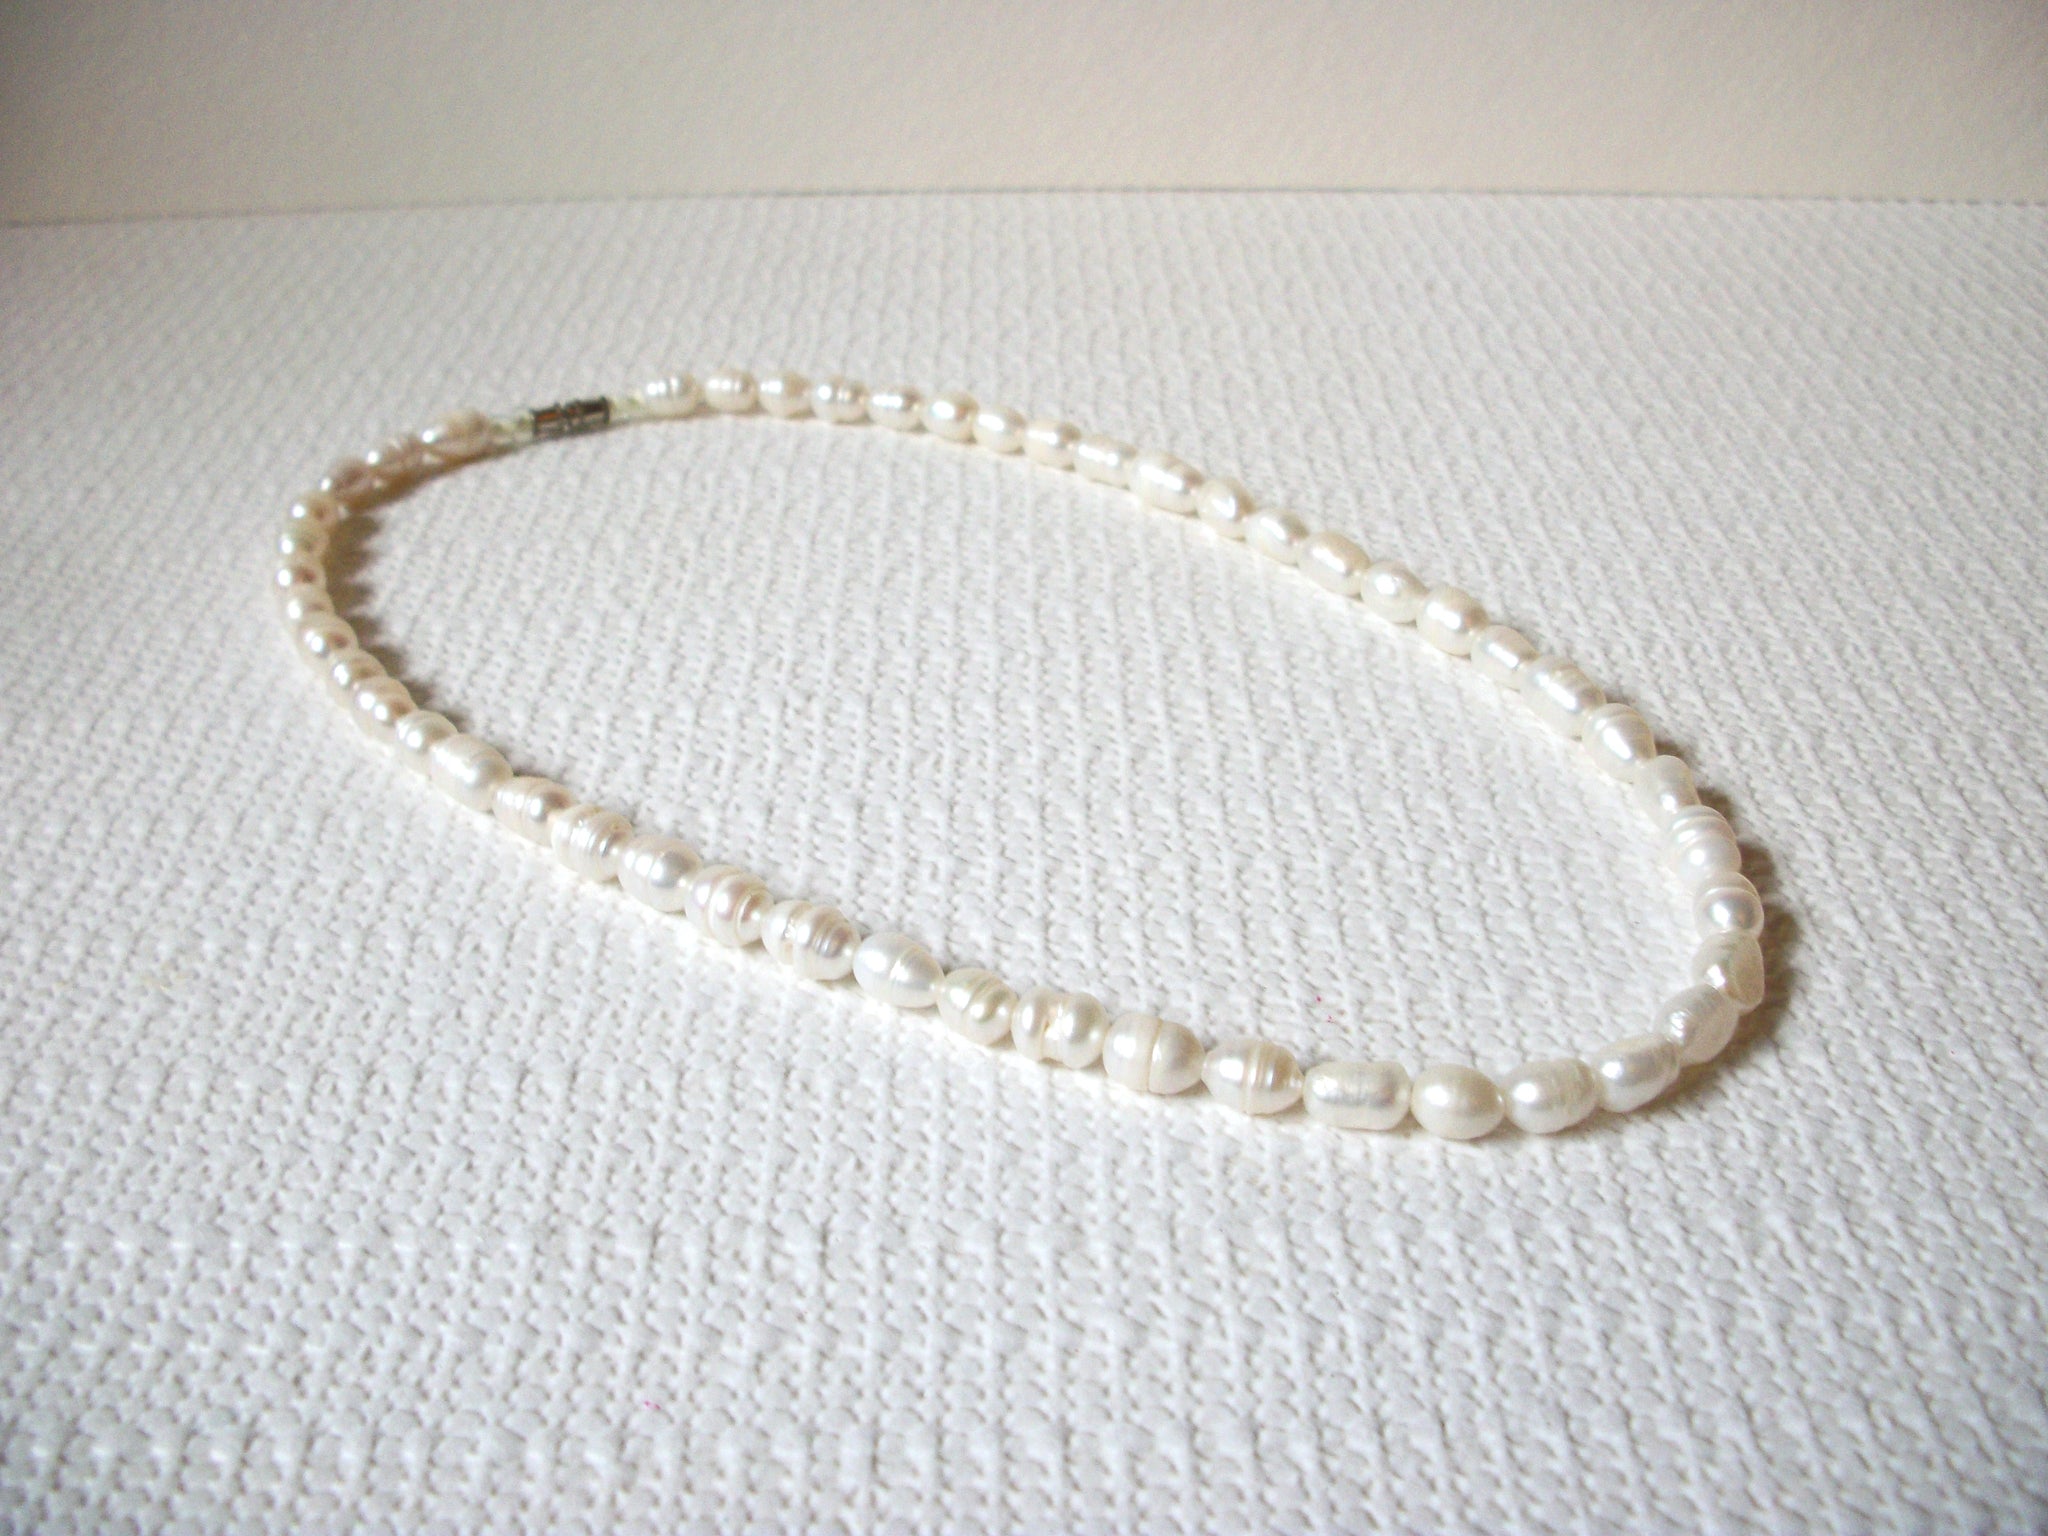 Freshwater Pearl Necklace 93020